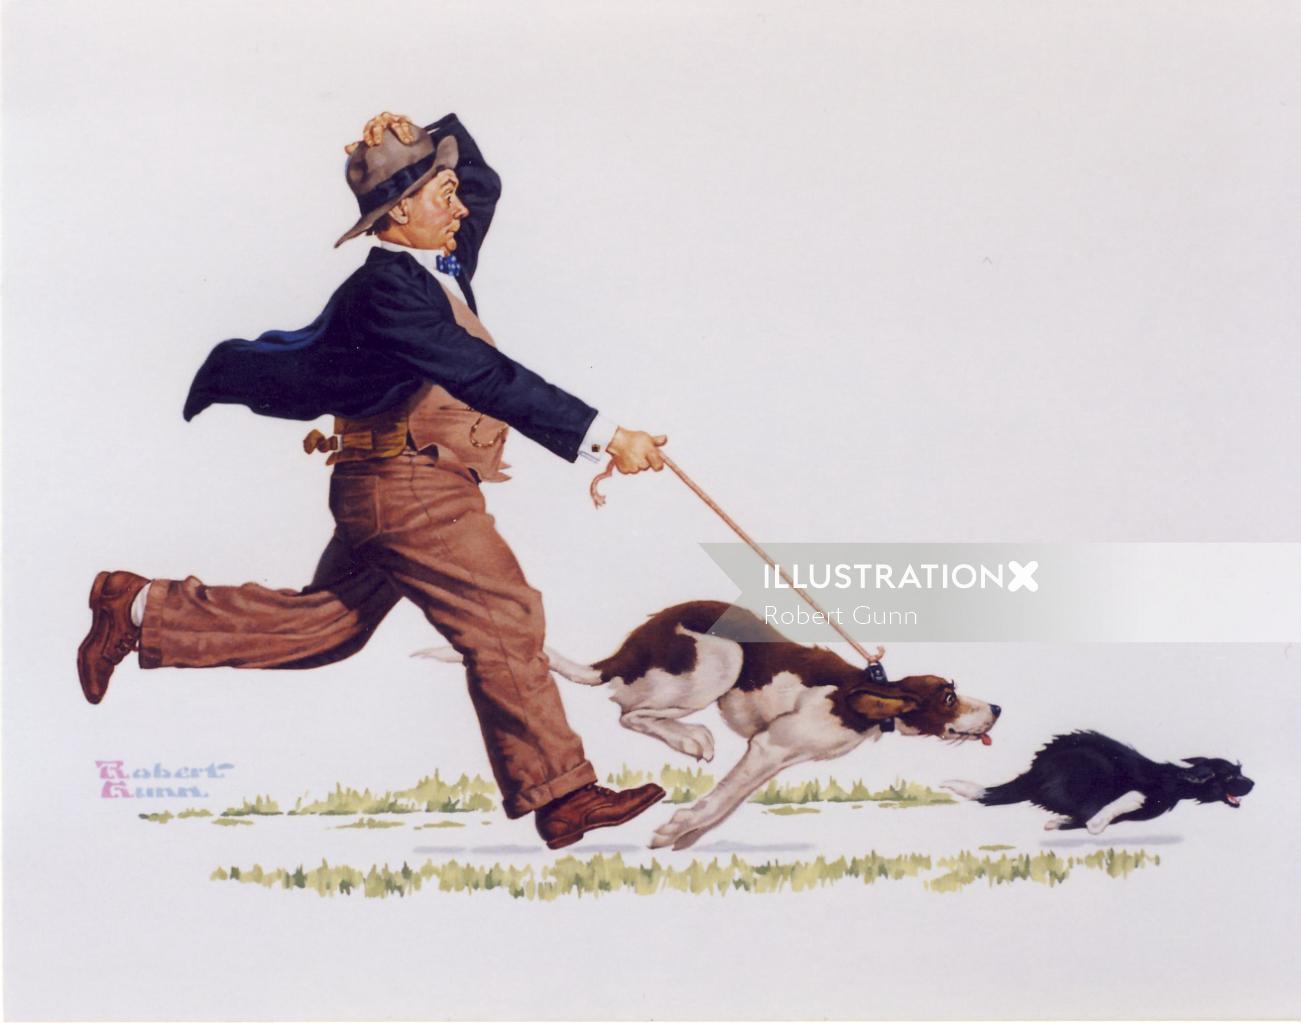 Illustration of Dog chasing cat with man hanging on